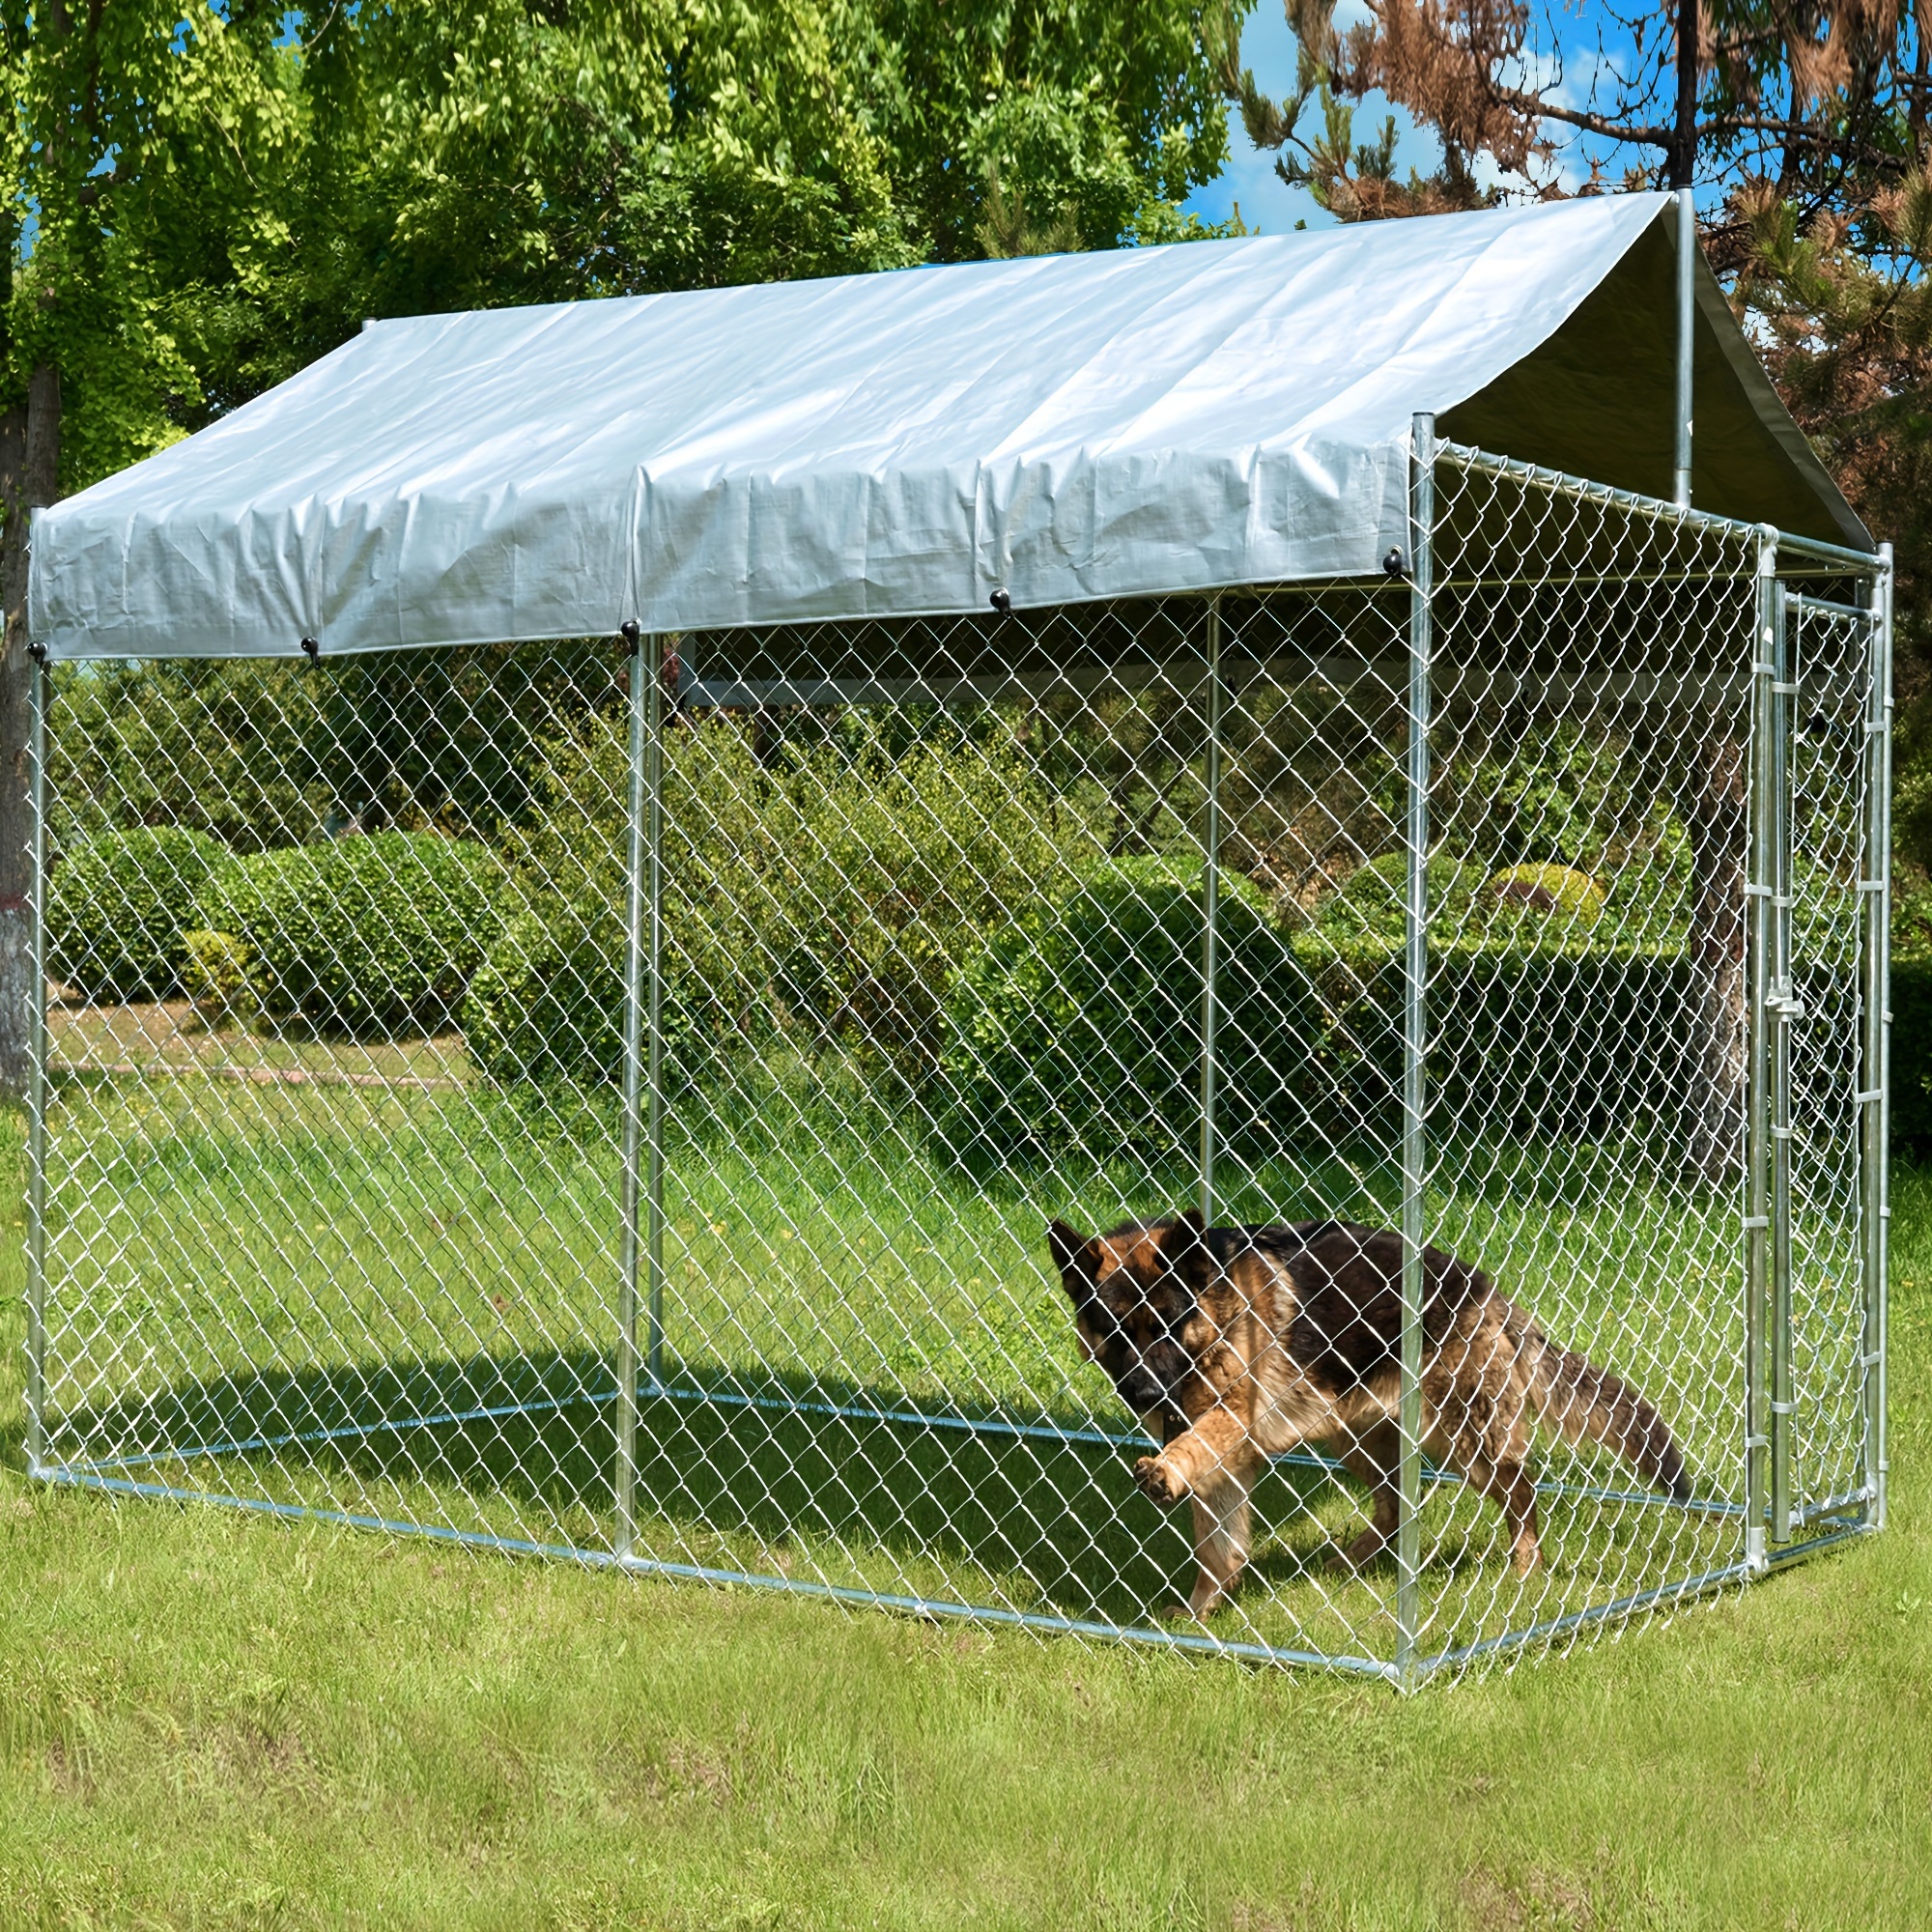 

Large Dog Kennel Outdoor, Heavy Duty Dog Pen Cage With Cover And Secure Lock, Dog Run, Chain Link Dog Crate With Waterproof Uv-resistant Roof For